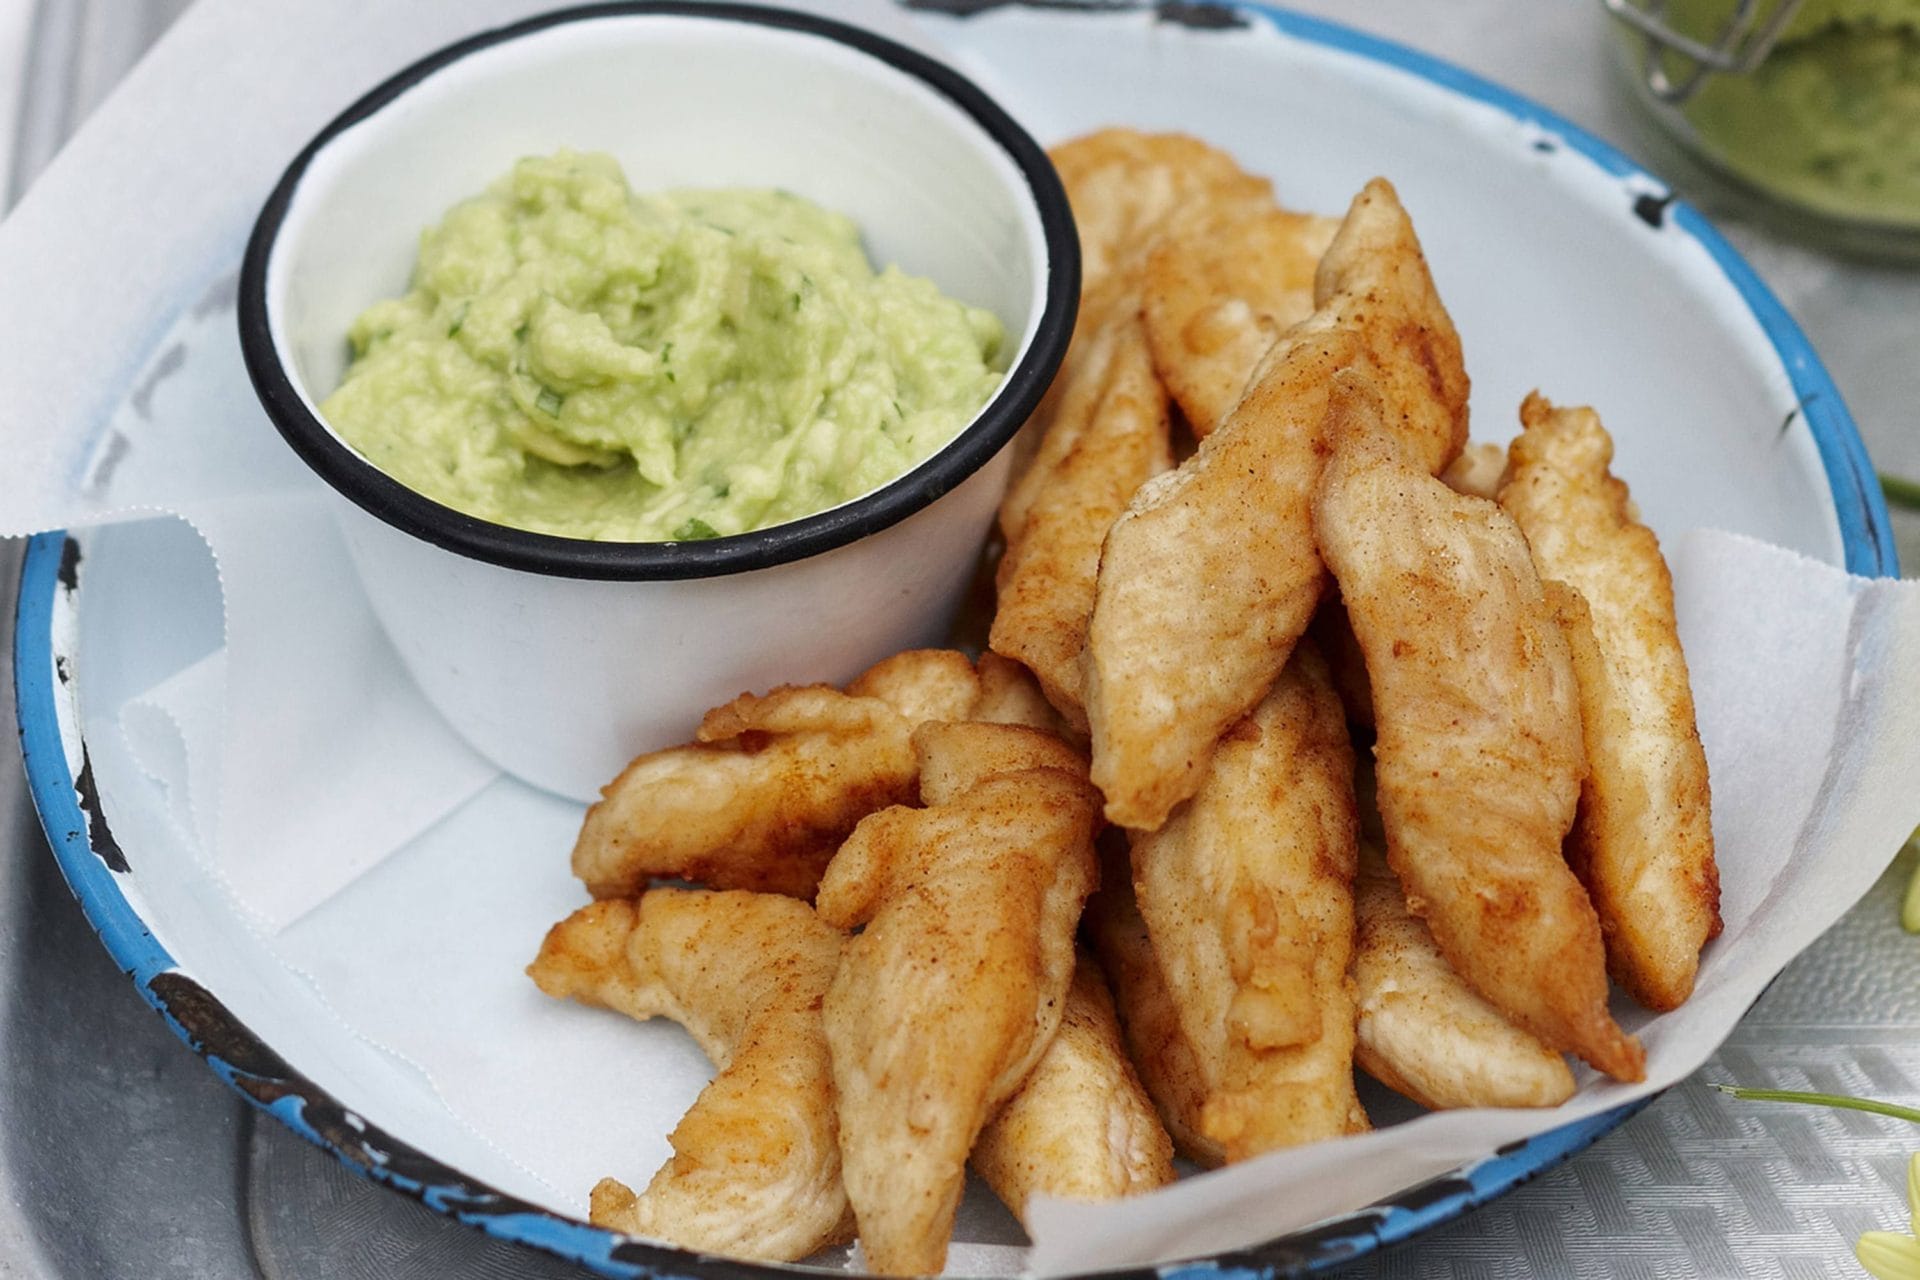 Spicy Chicken Tenders with Avocado Dip